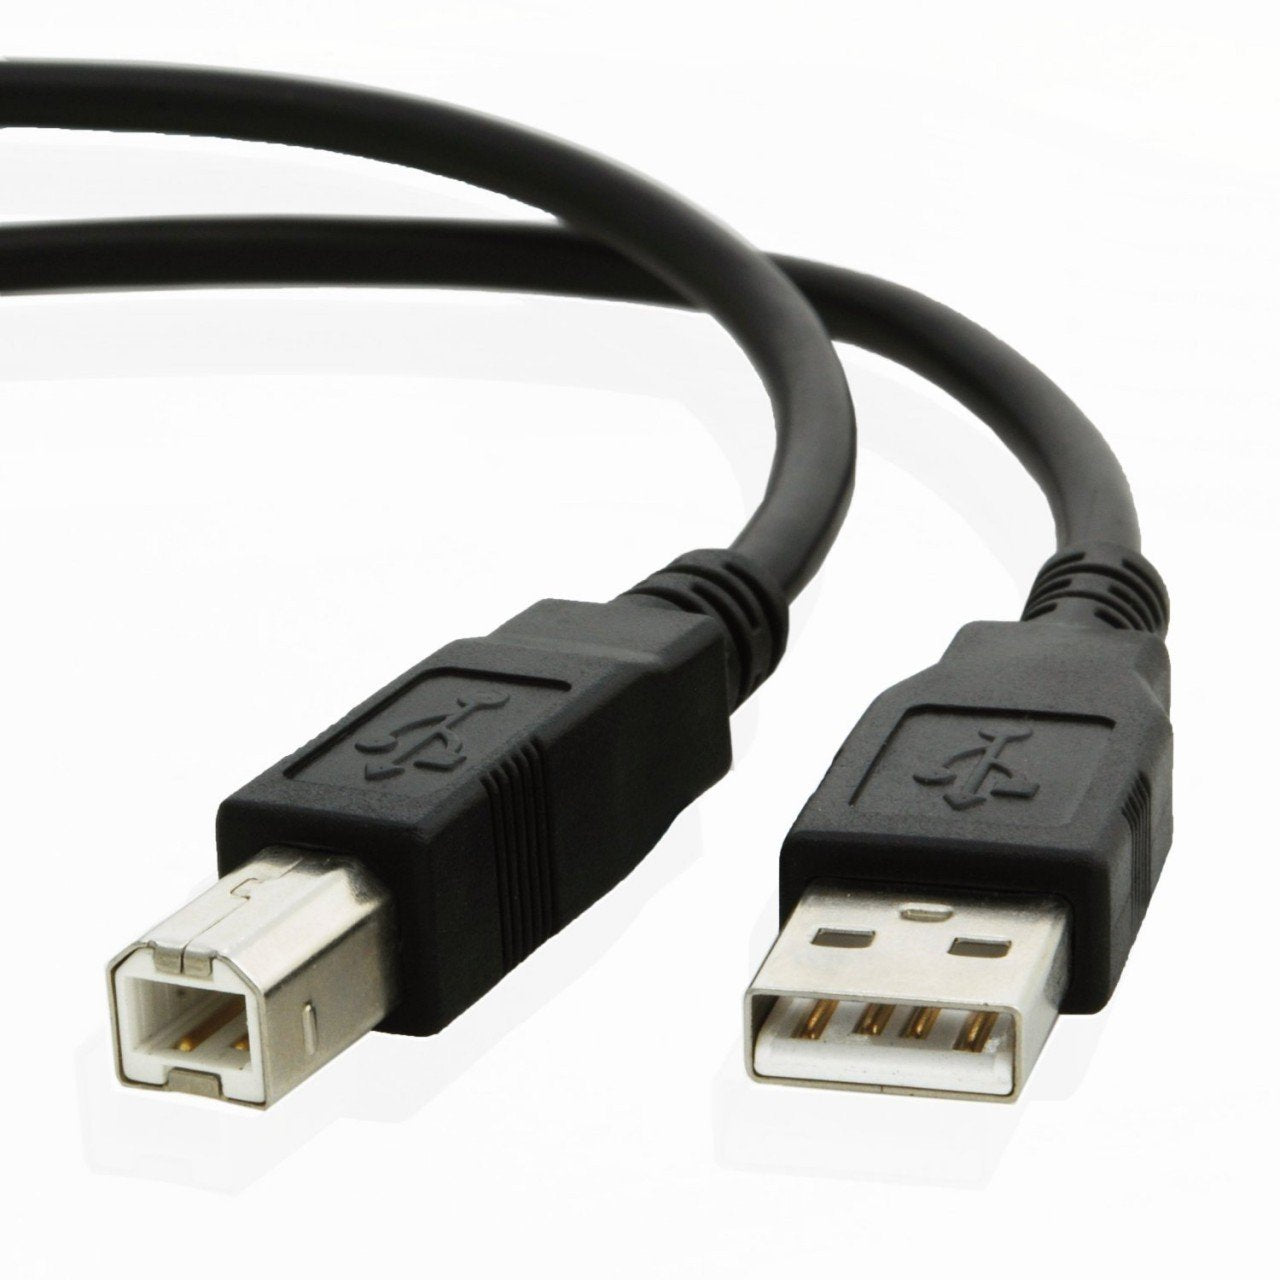 USB cable for Hp LASERJET PRO M477fnw